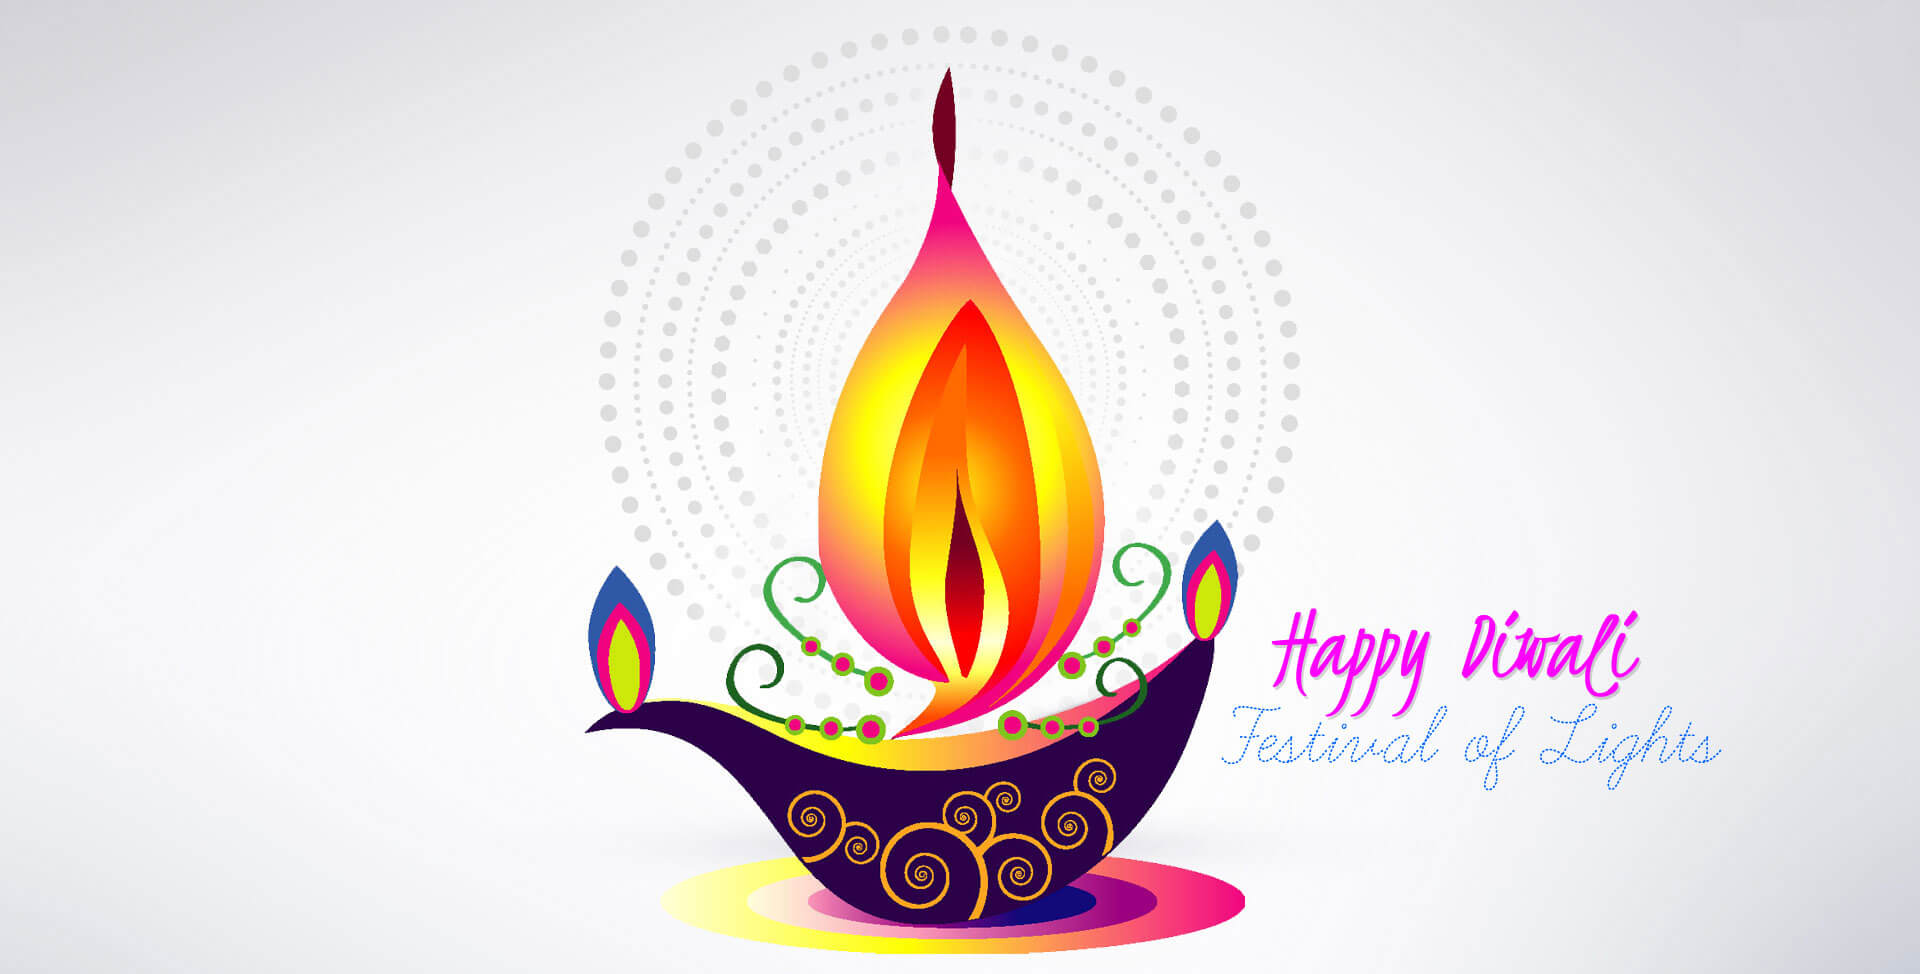 100+) Happy Diwali 2021, Wishes, HD Wallpaper, Messages, Greeting Cards